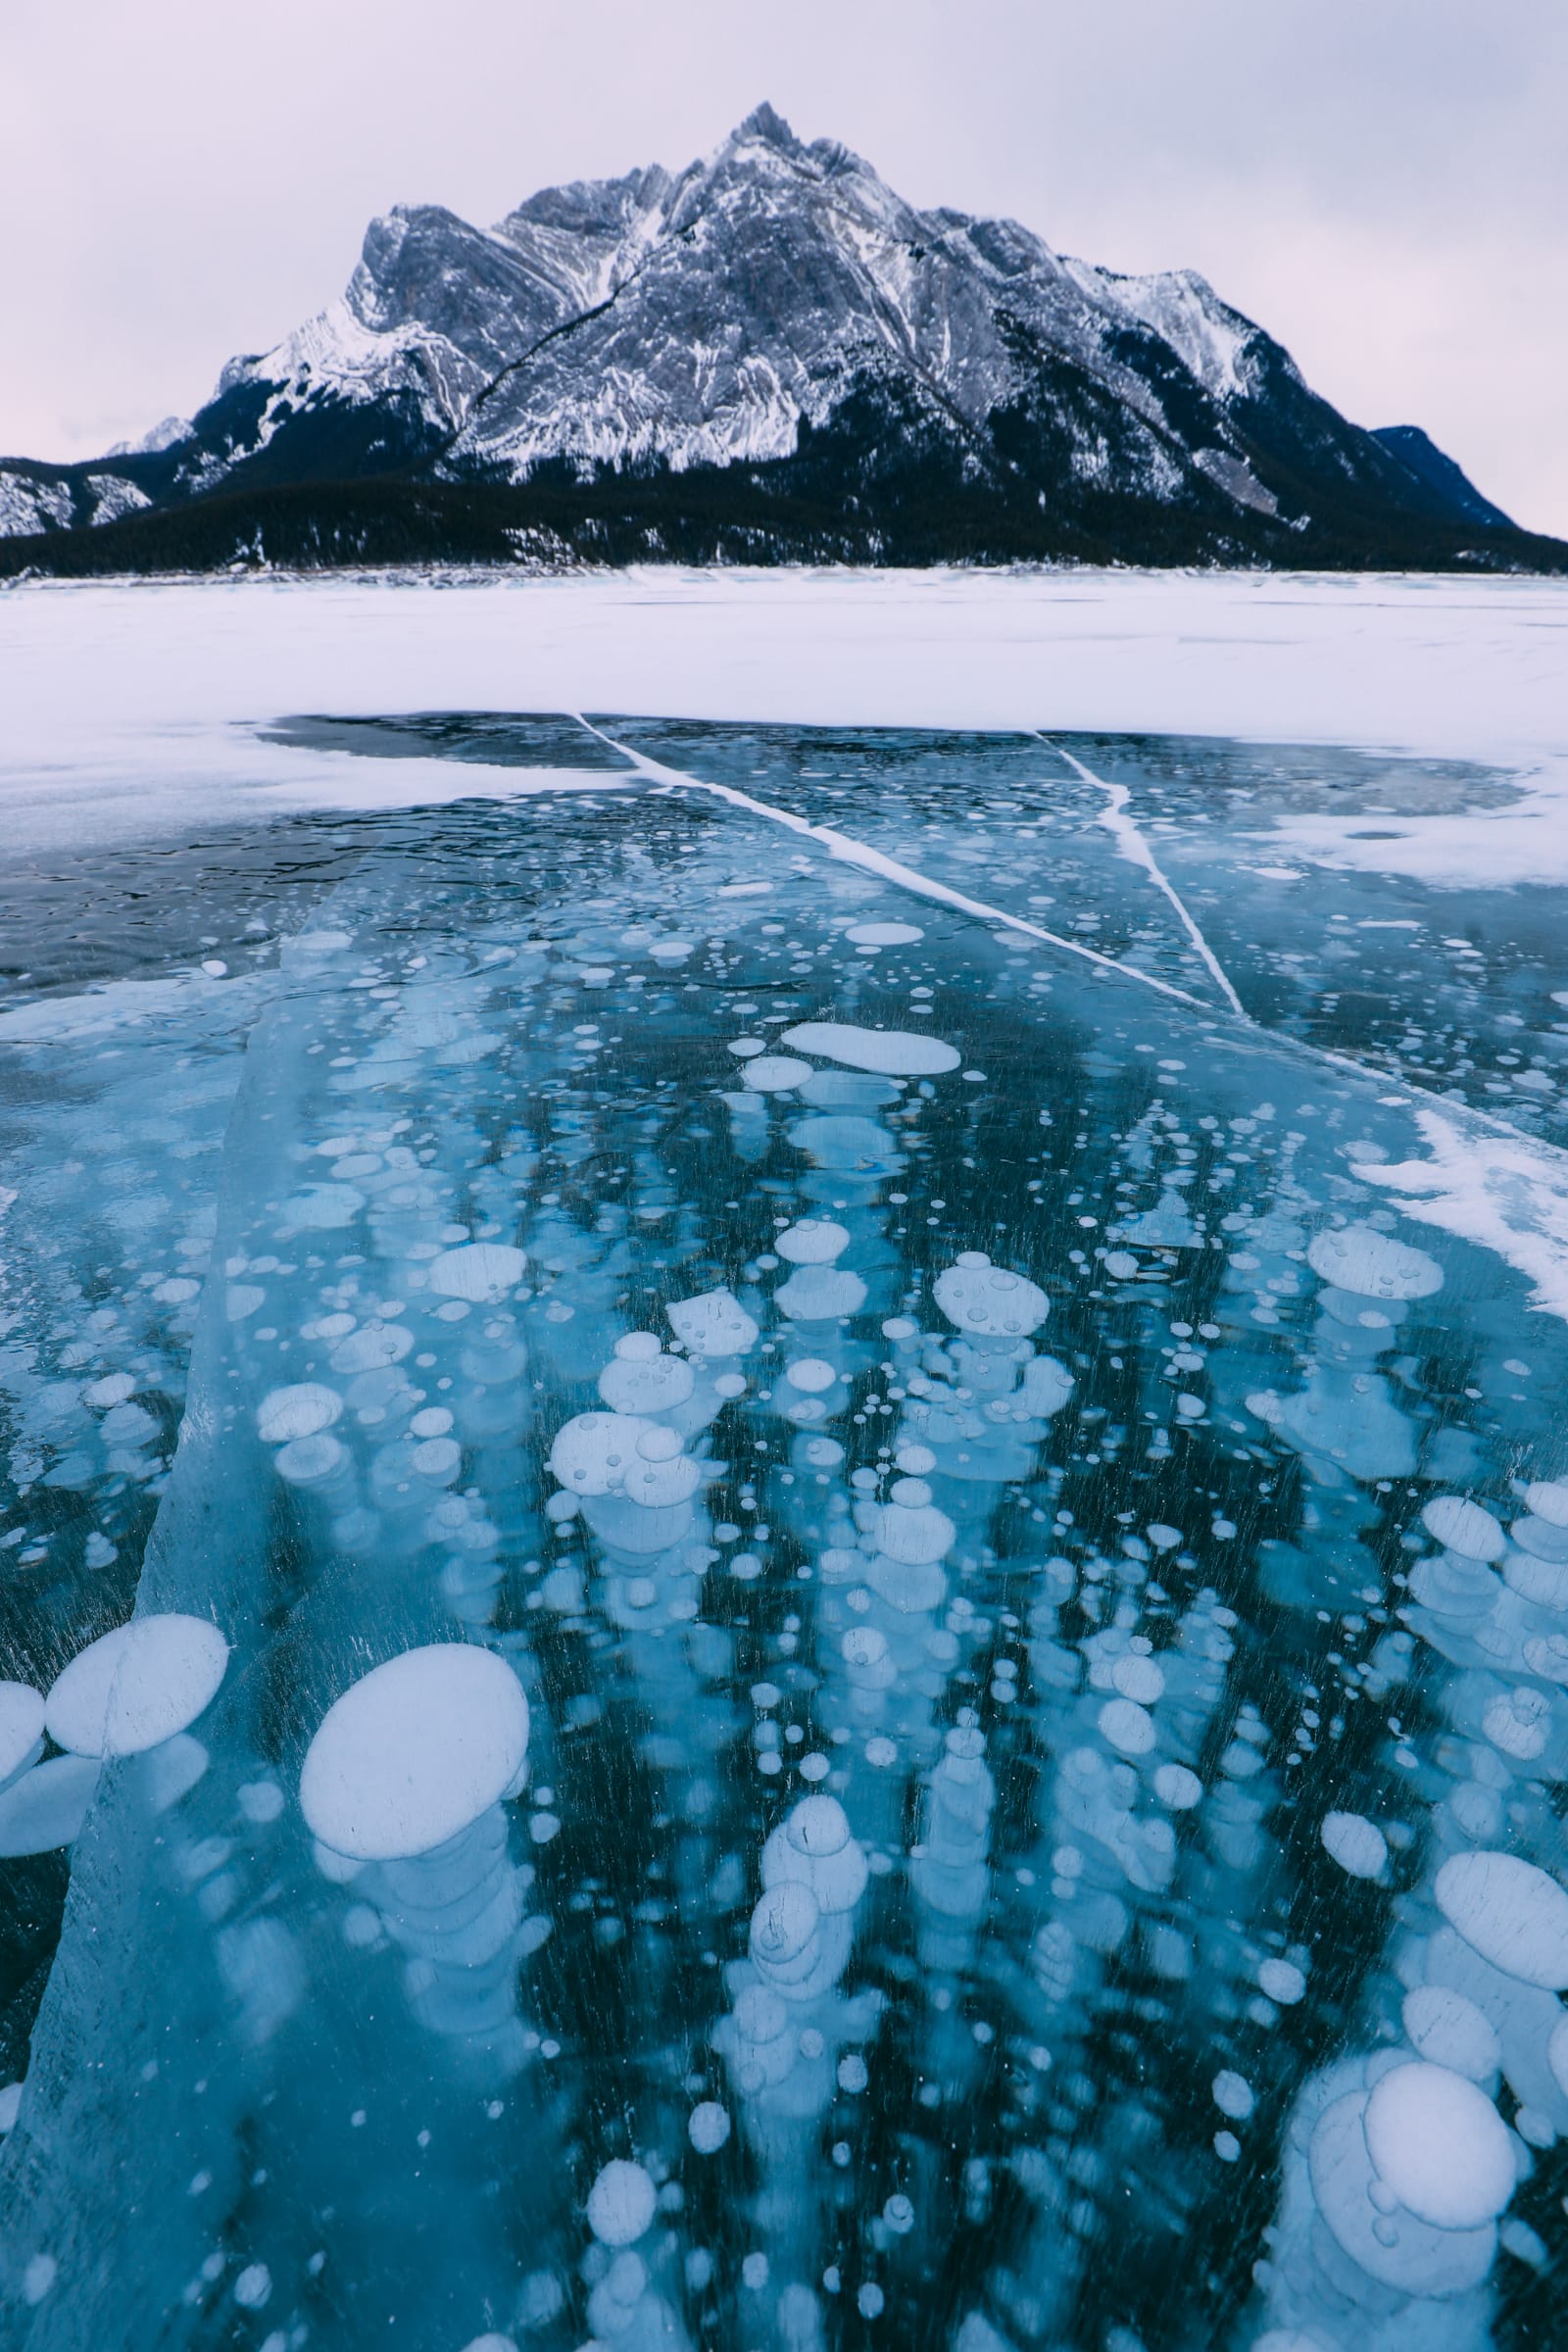 Driving Canada's Epic Icefields Parkway And Finding The Frozen Bubbles Of Abraham Lake (32)